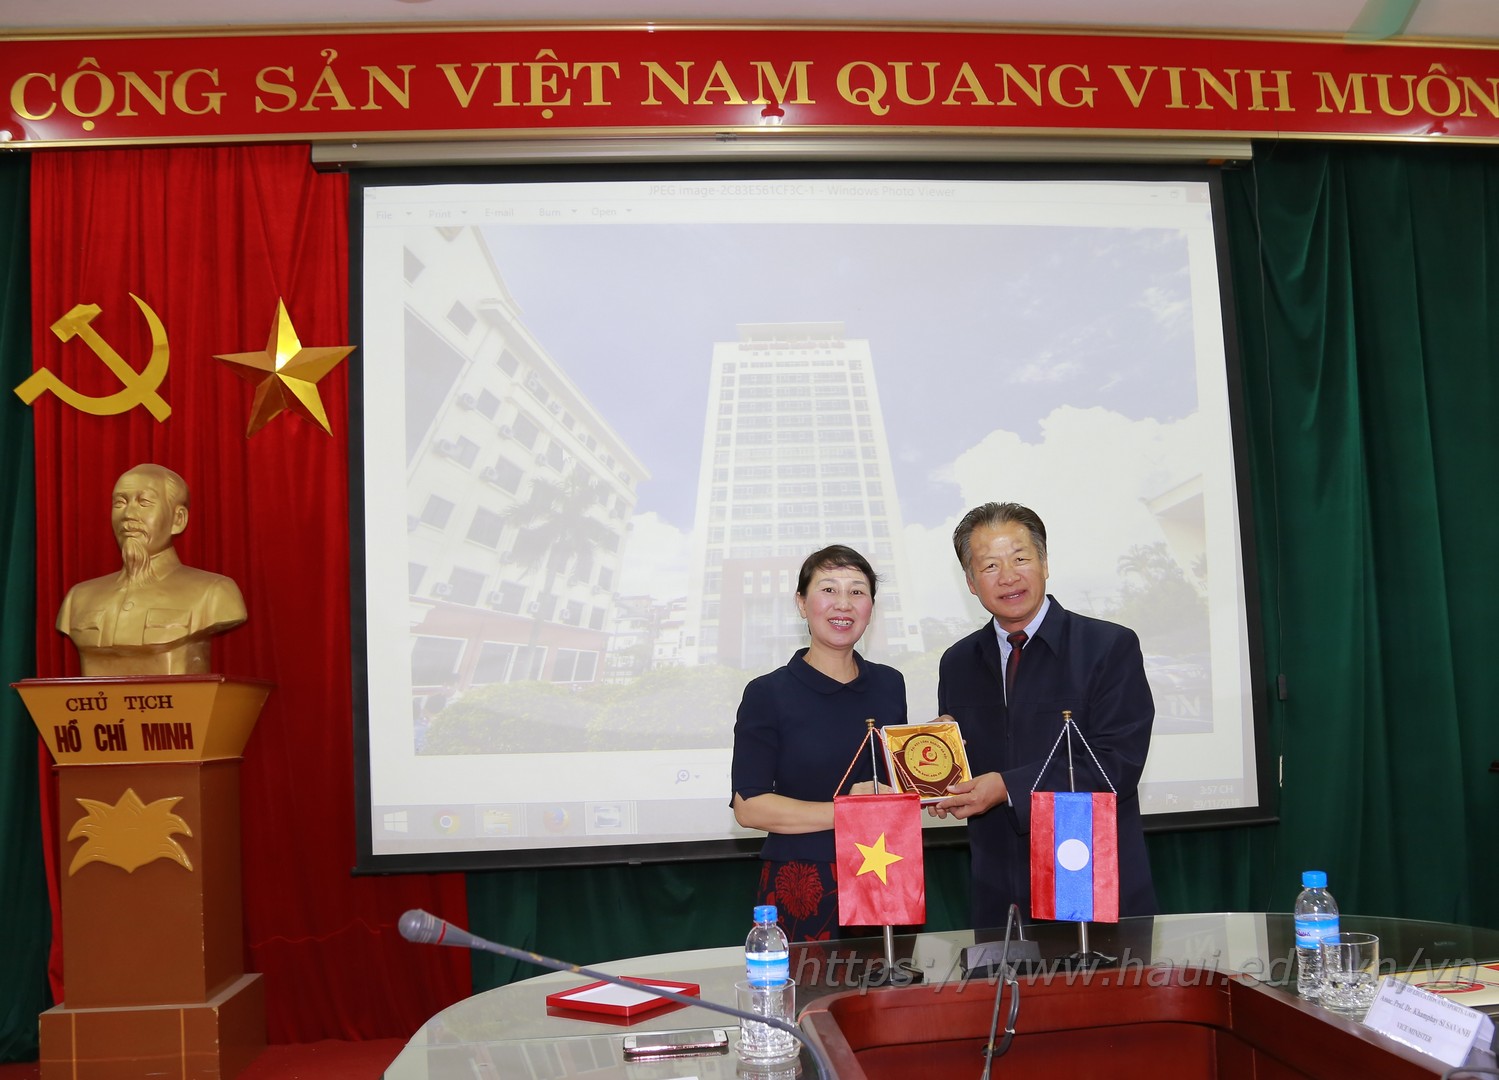 Hanoi University of Industry and Laos’ Ministry of Education and Sports talk on gender equality and women’s advancements